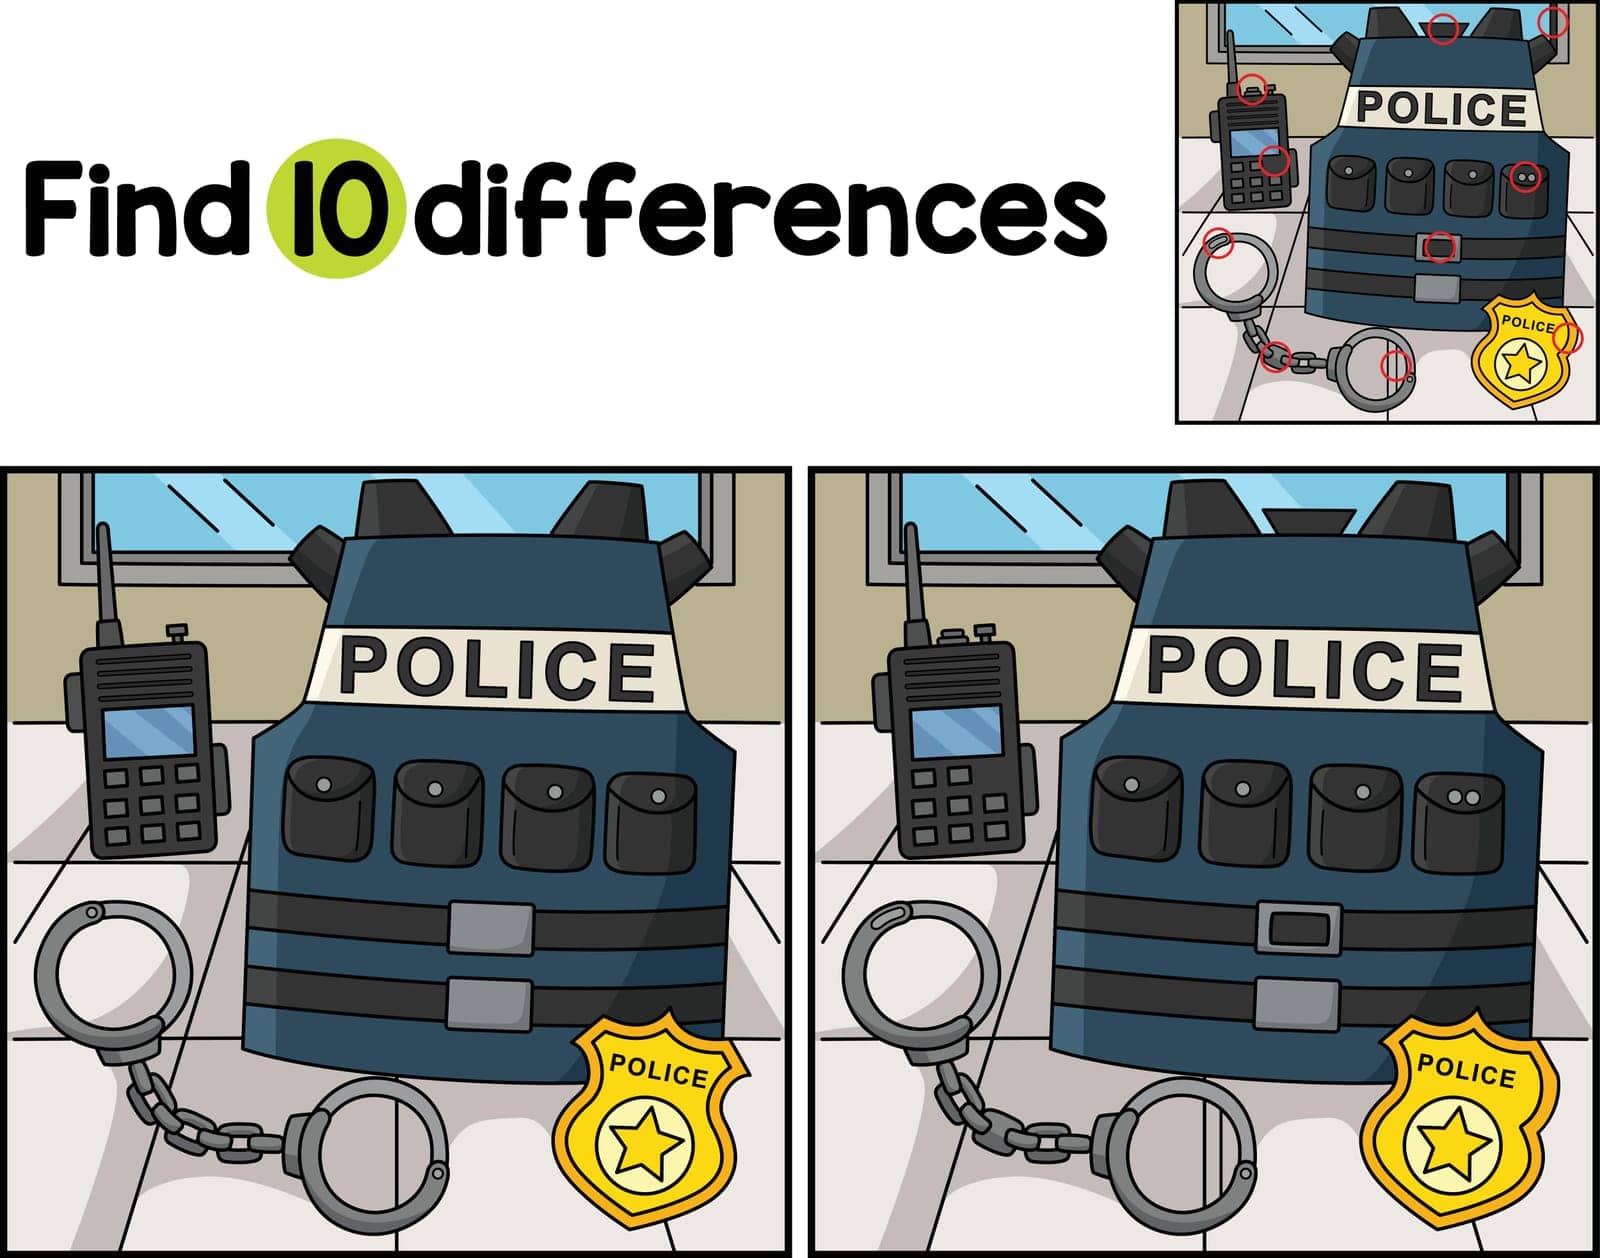 Police Officer Equipment Find The Differences by abbydesign